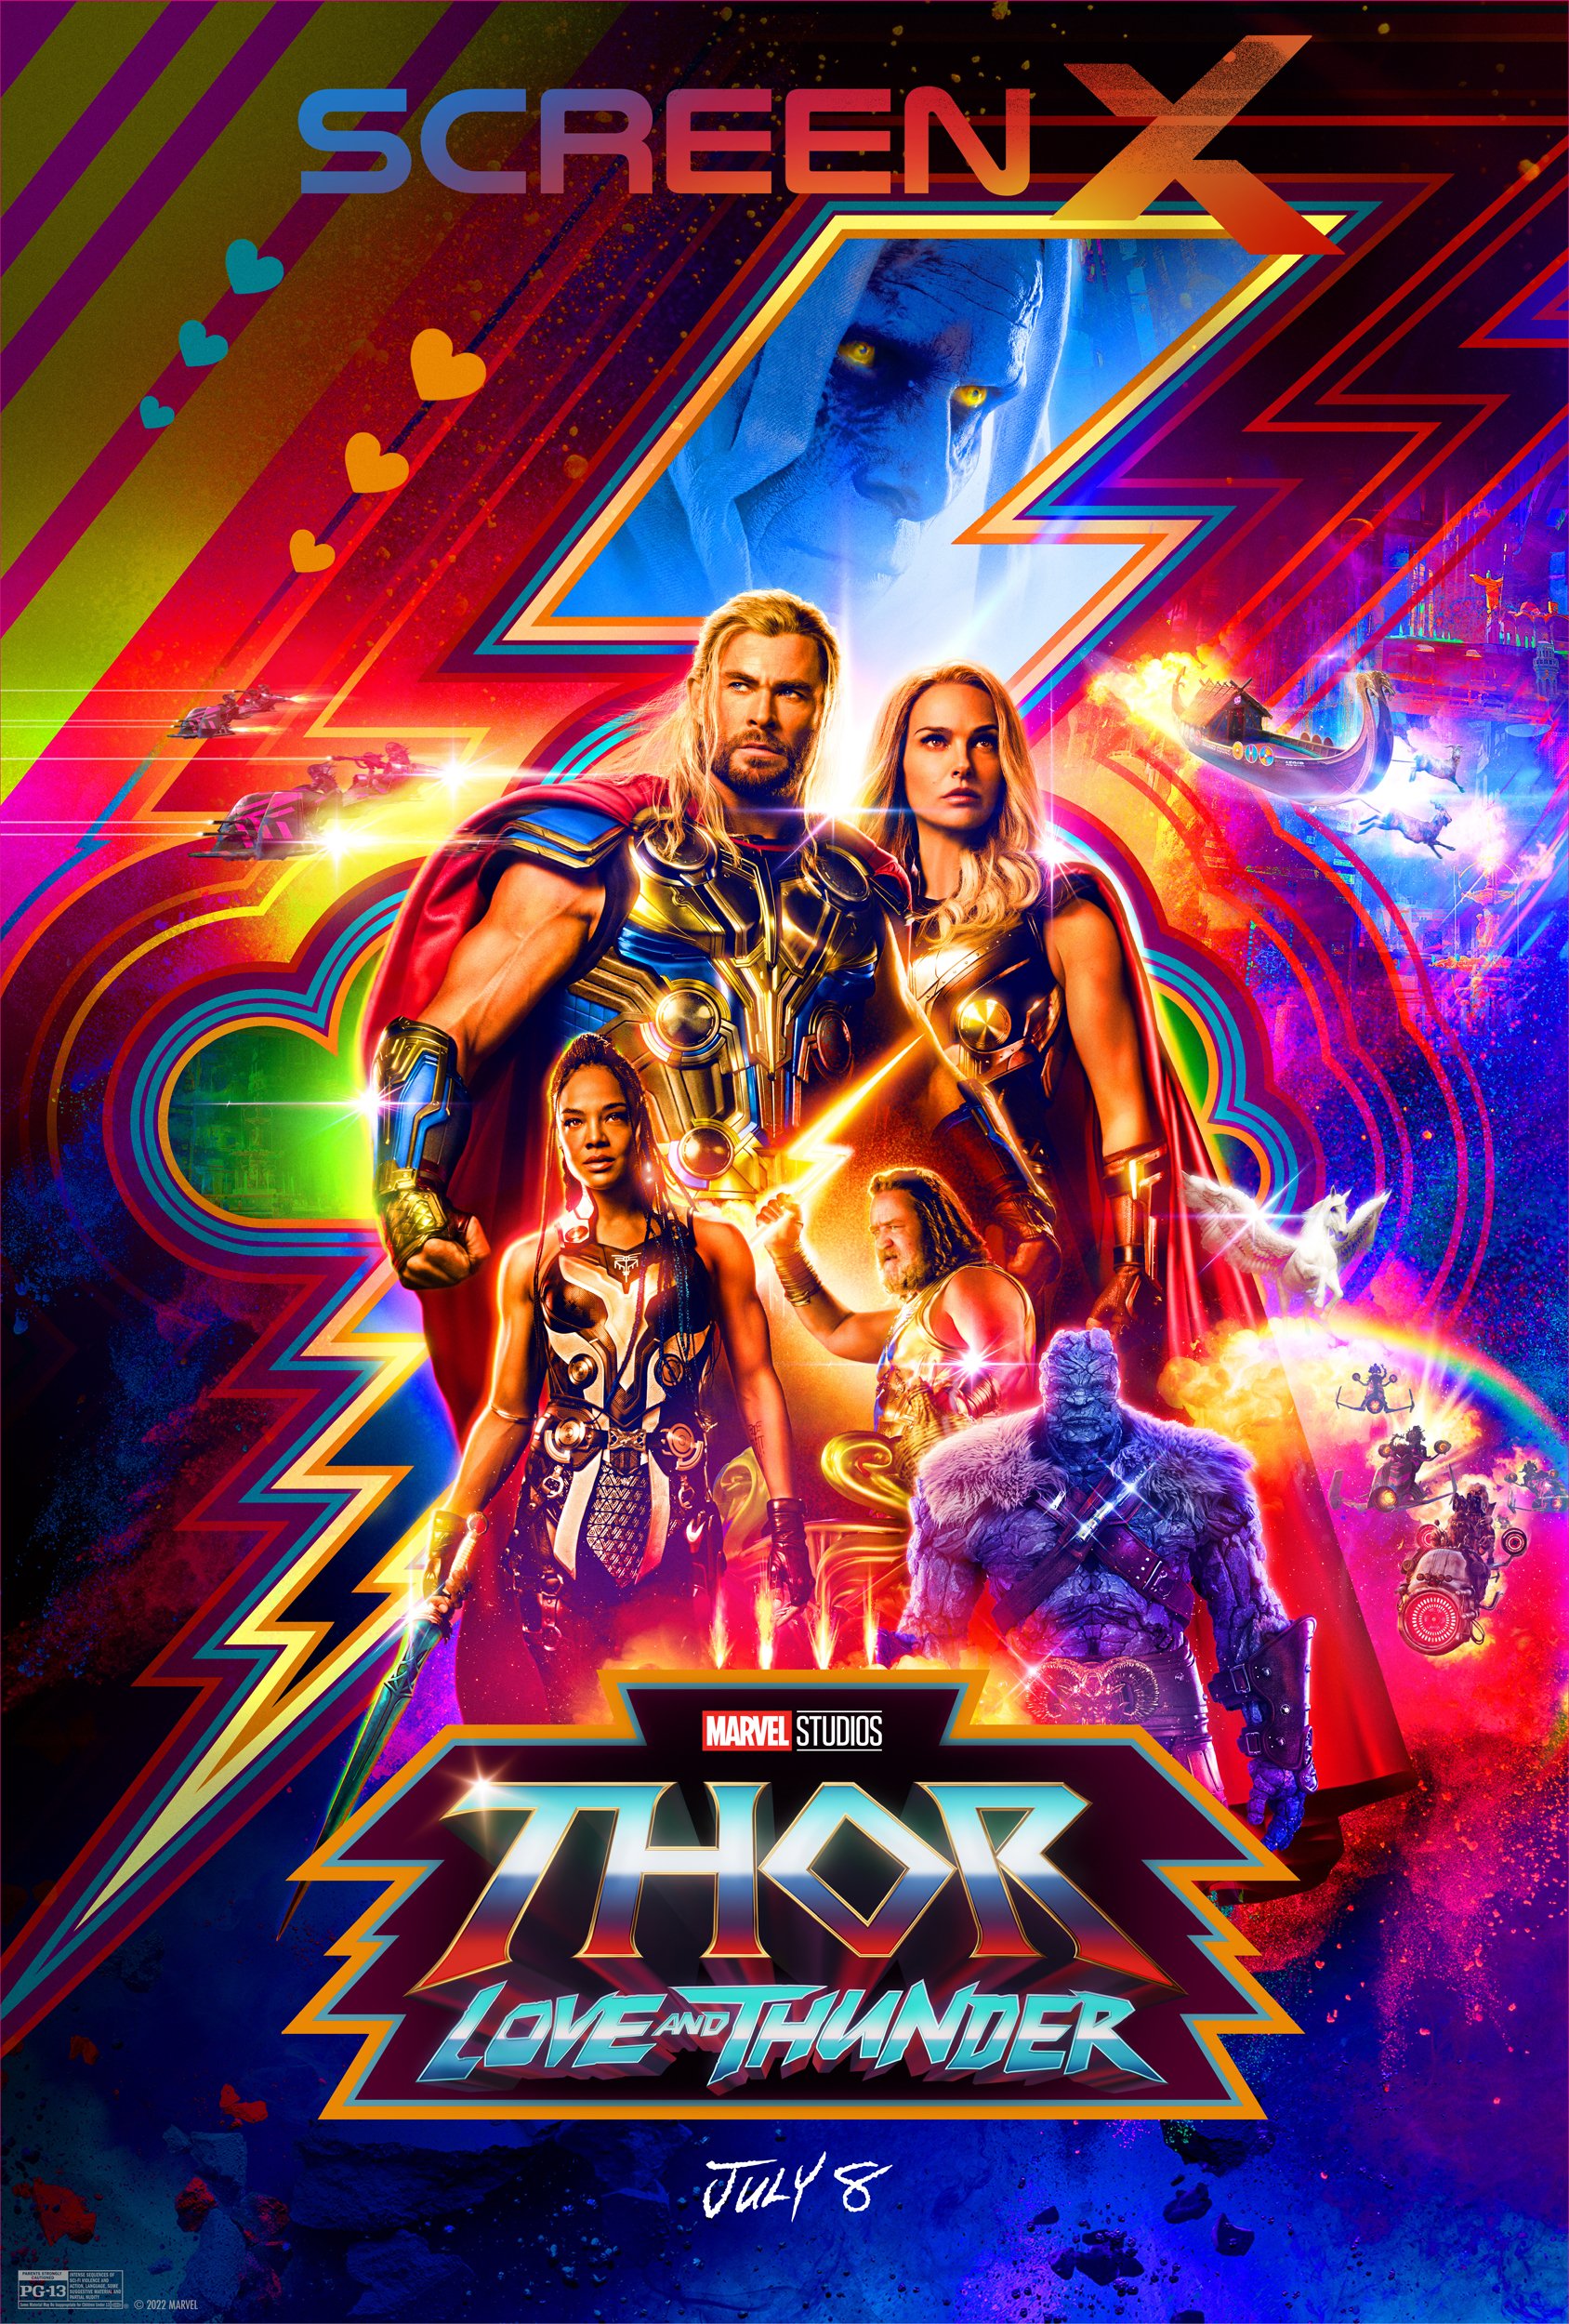 Thor Love and Thunder ScreenX poster